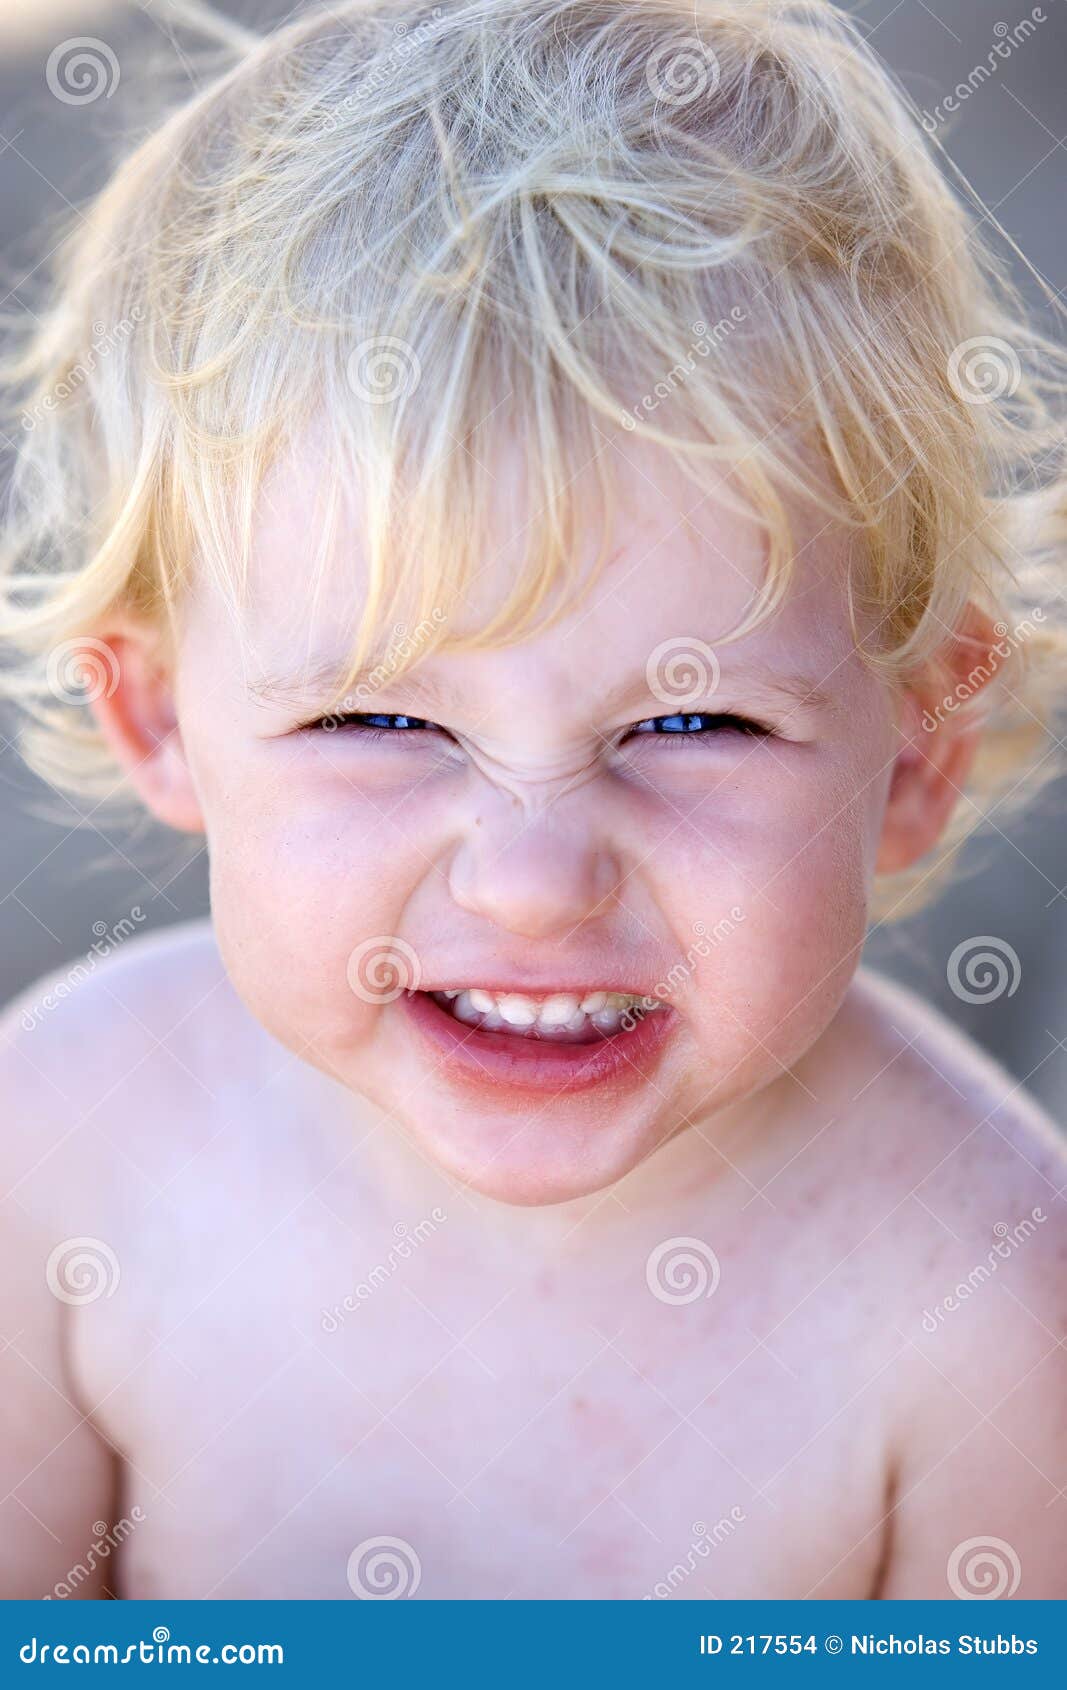 young female child or toddler with cheeky grin on her face